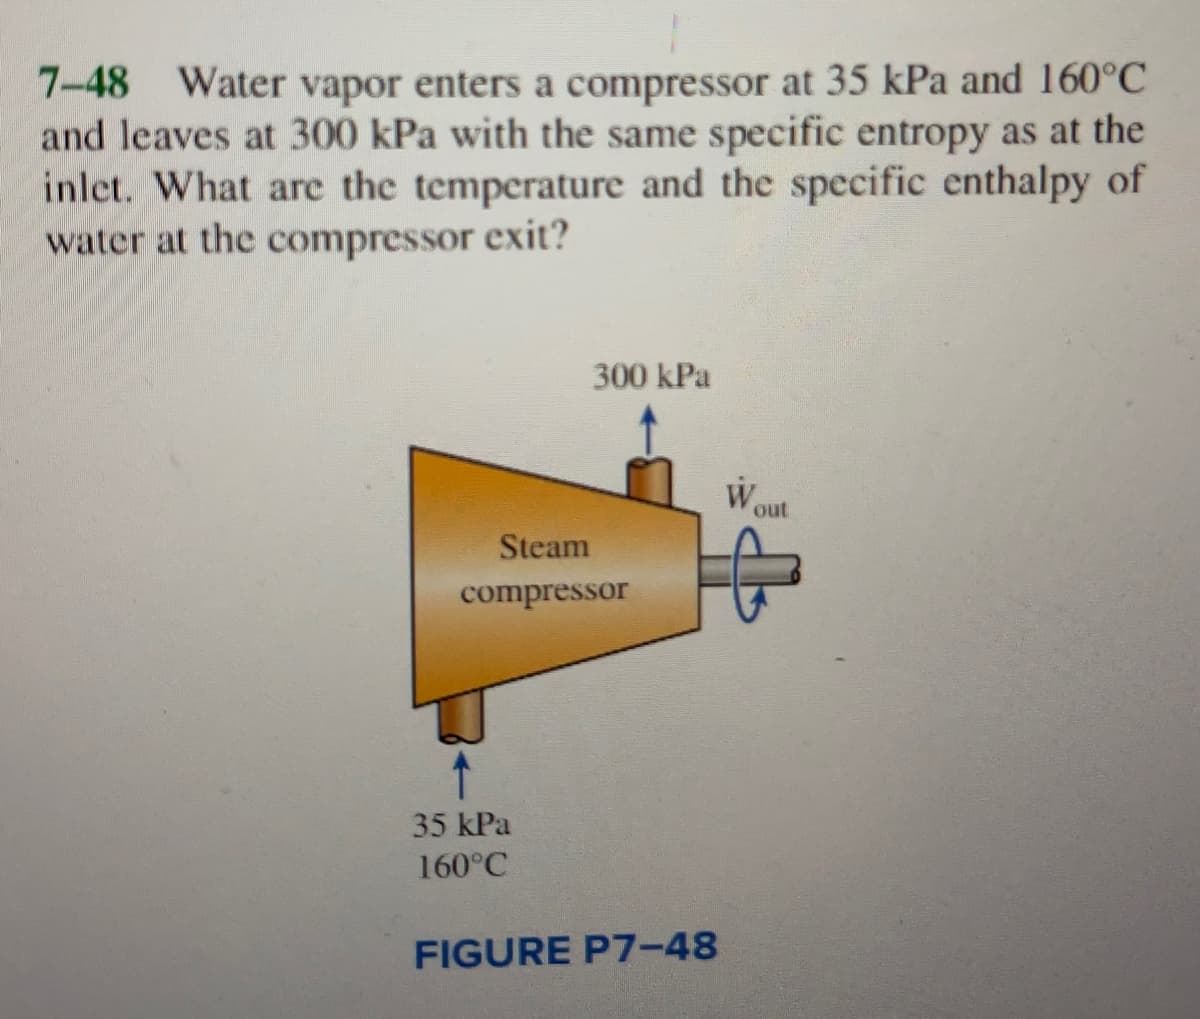 7-48 Water vapor enters a compressor at 35 kPa and 160°C
and leaves at 300 kPa with the same specific entropy as at the
inlet. What are the temperature and the specific enthalpy of
water at the compressor exit?
300 kPa
Steam
compressor
35 kPa
160°C
FIGURE P7-48
W
out